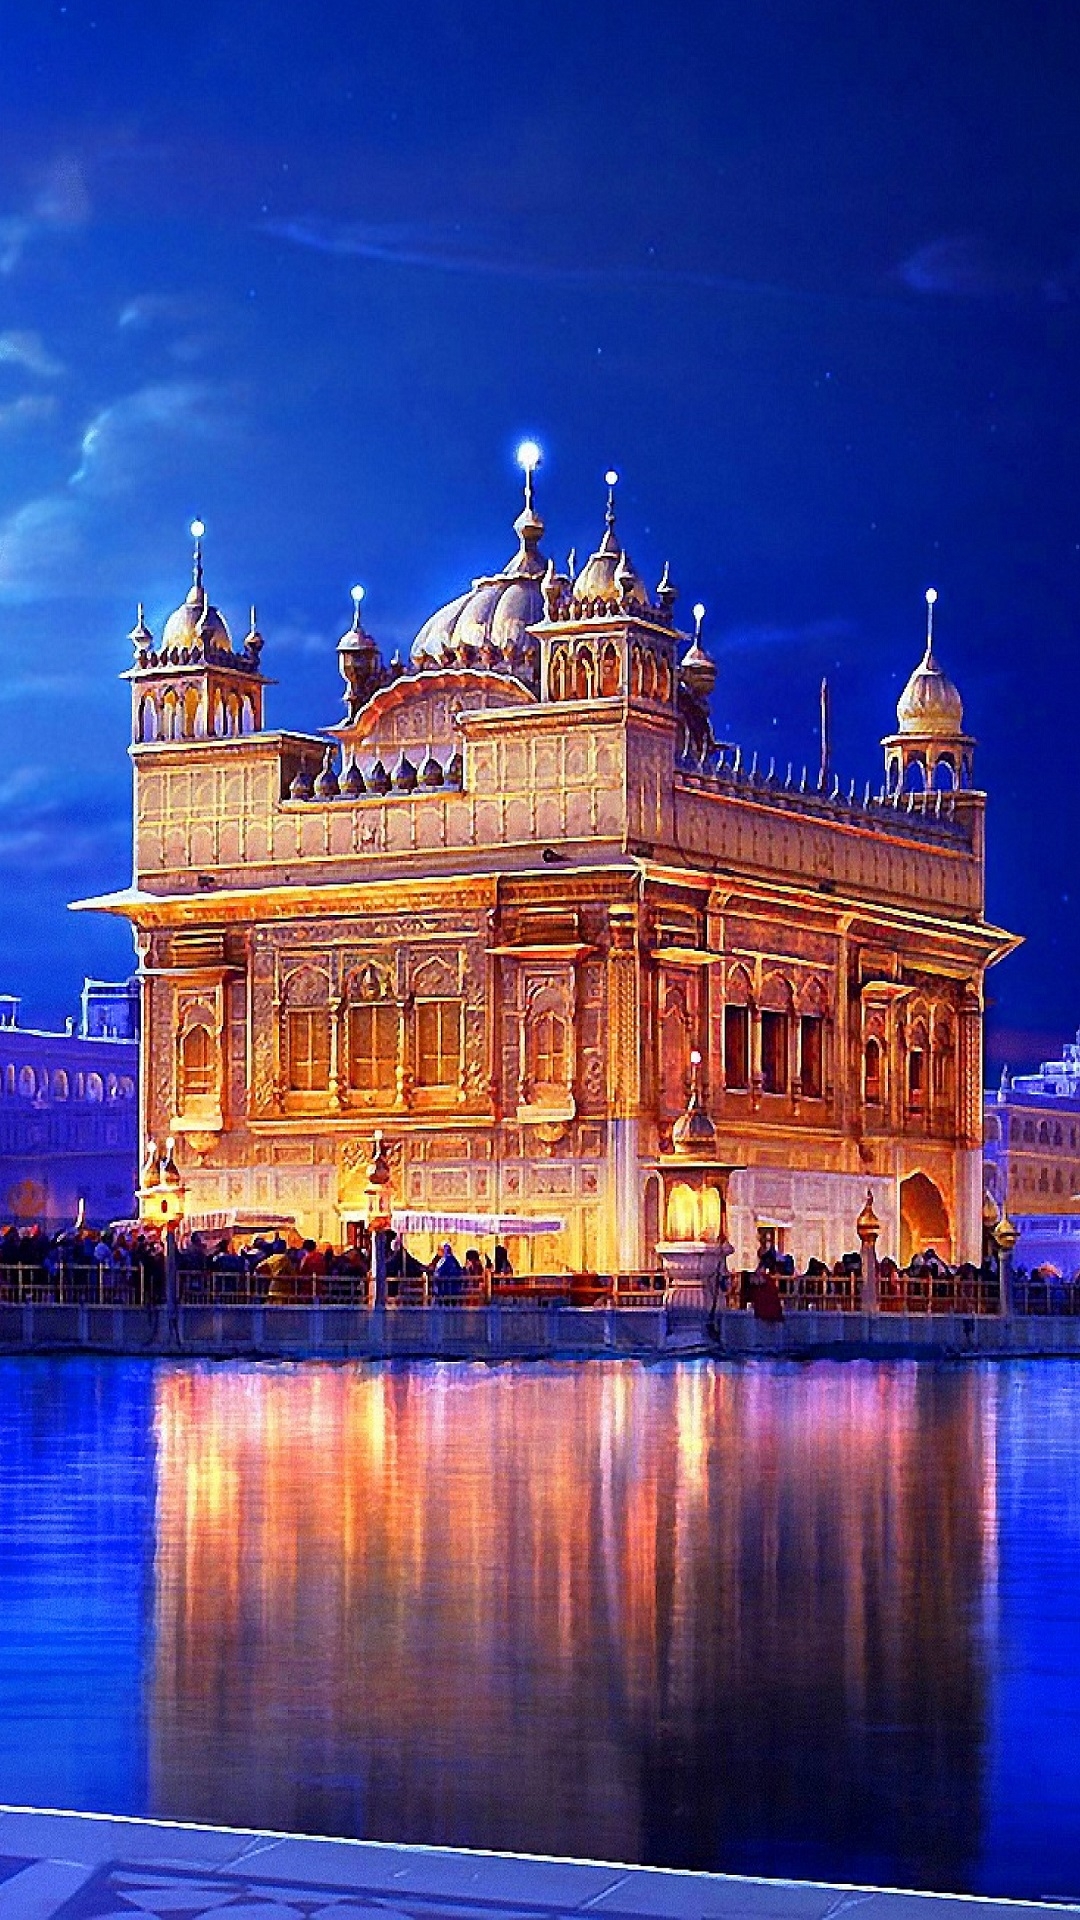 Golden Temple Amritsar India for Apple iPhone 6S & 7 Plus resolution